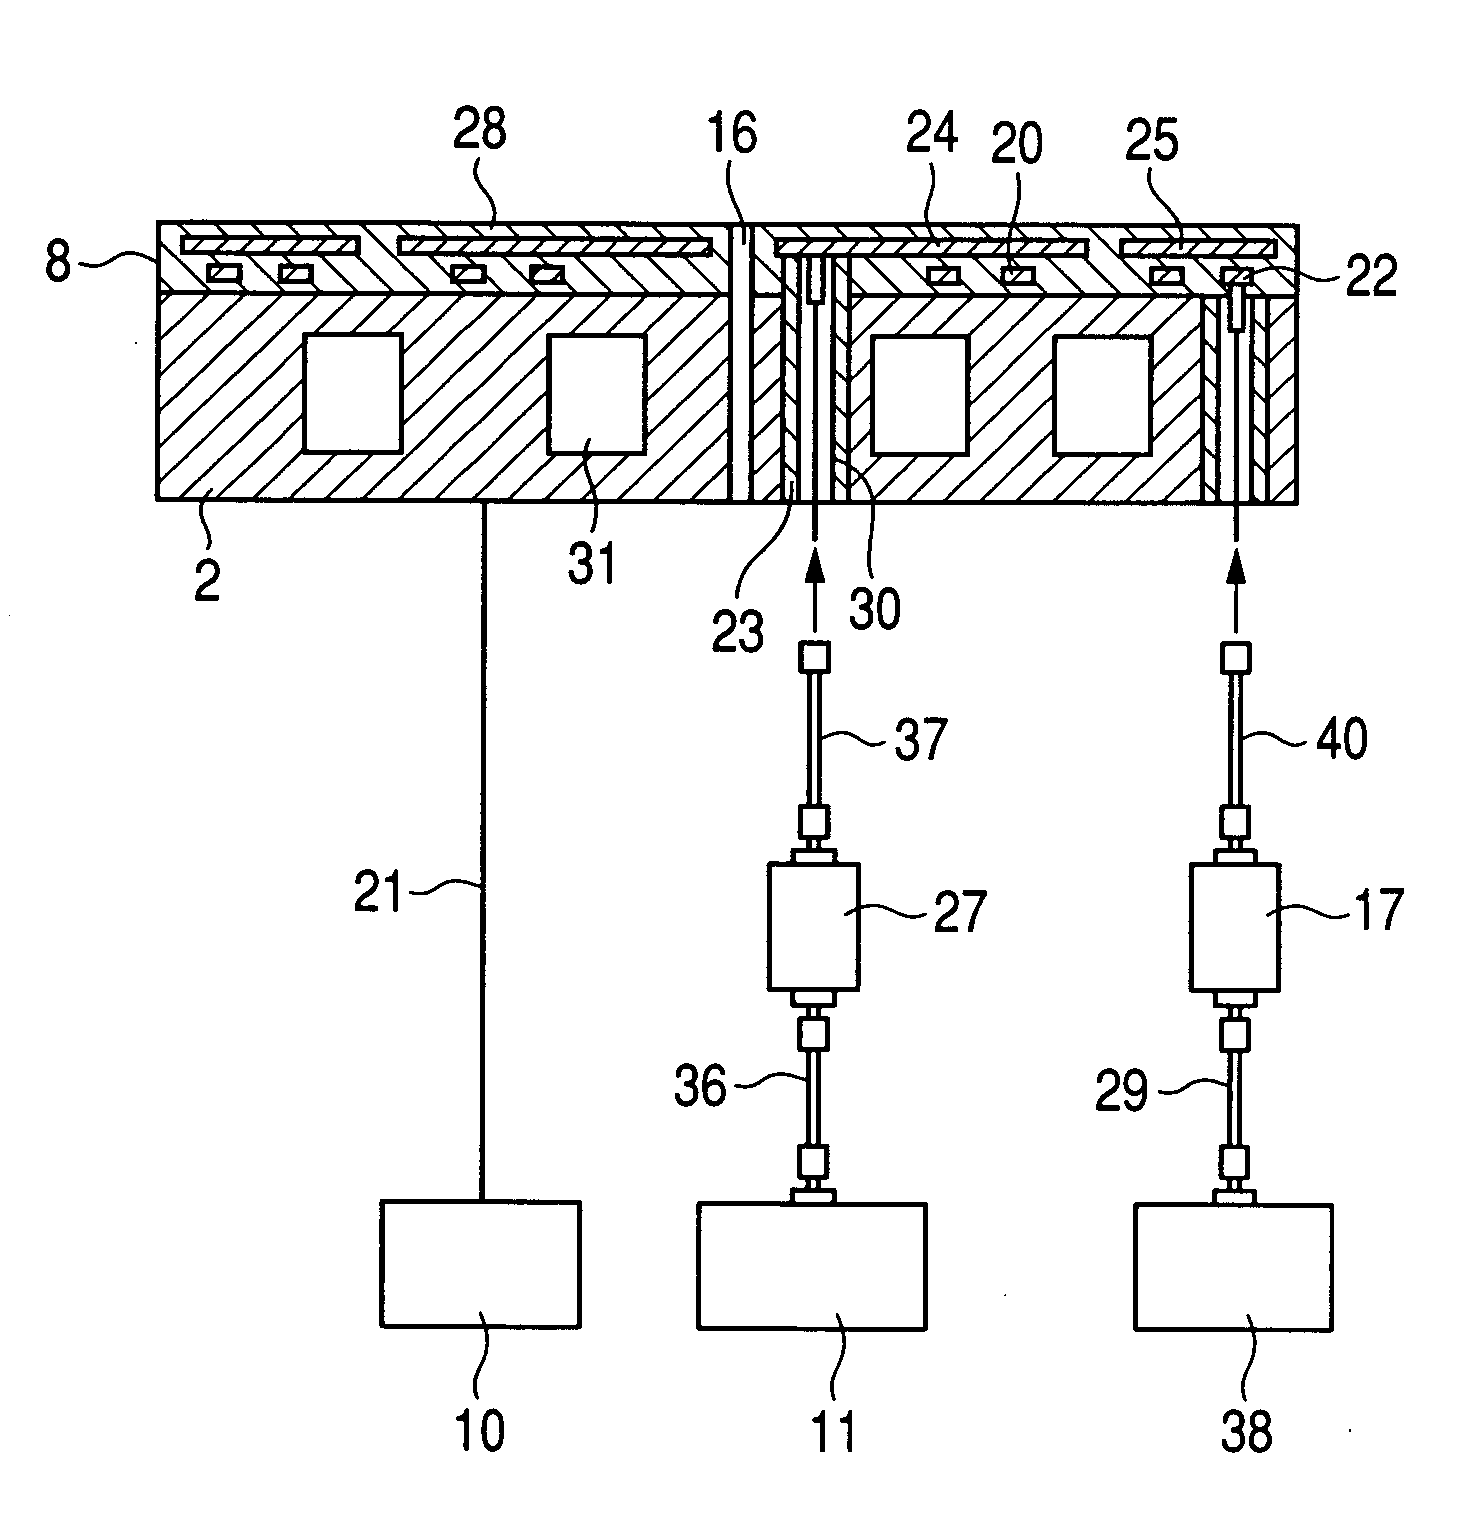 Plasma processing apparatus including electrostatic chuck with built-in heater